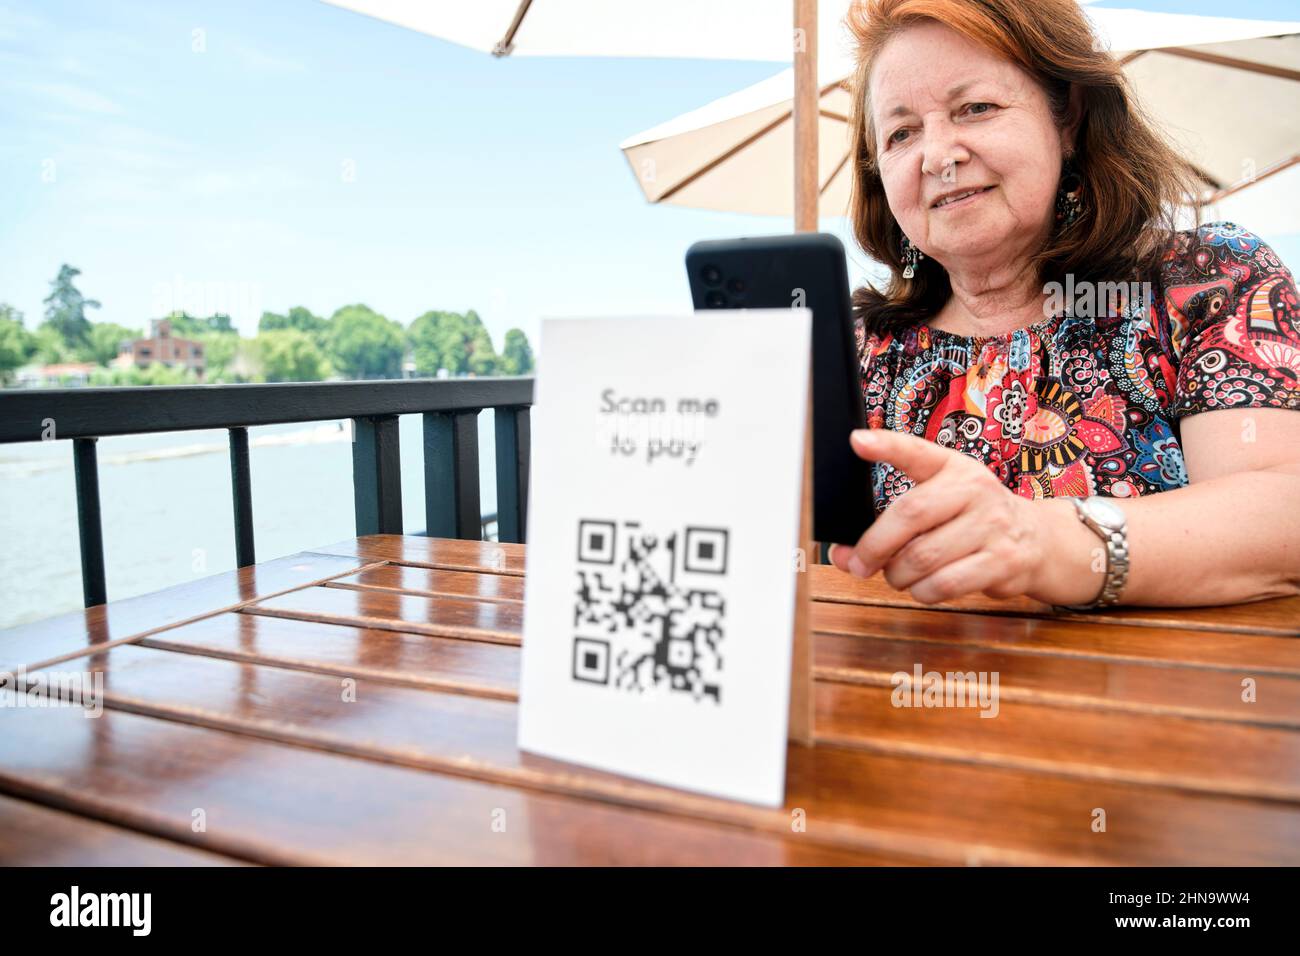 Mature hispanic woman scanning a QR code with her smartphone to pay her restaurant bill using contactless, cashless technology. Focus on the female cl Stock Photo